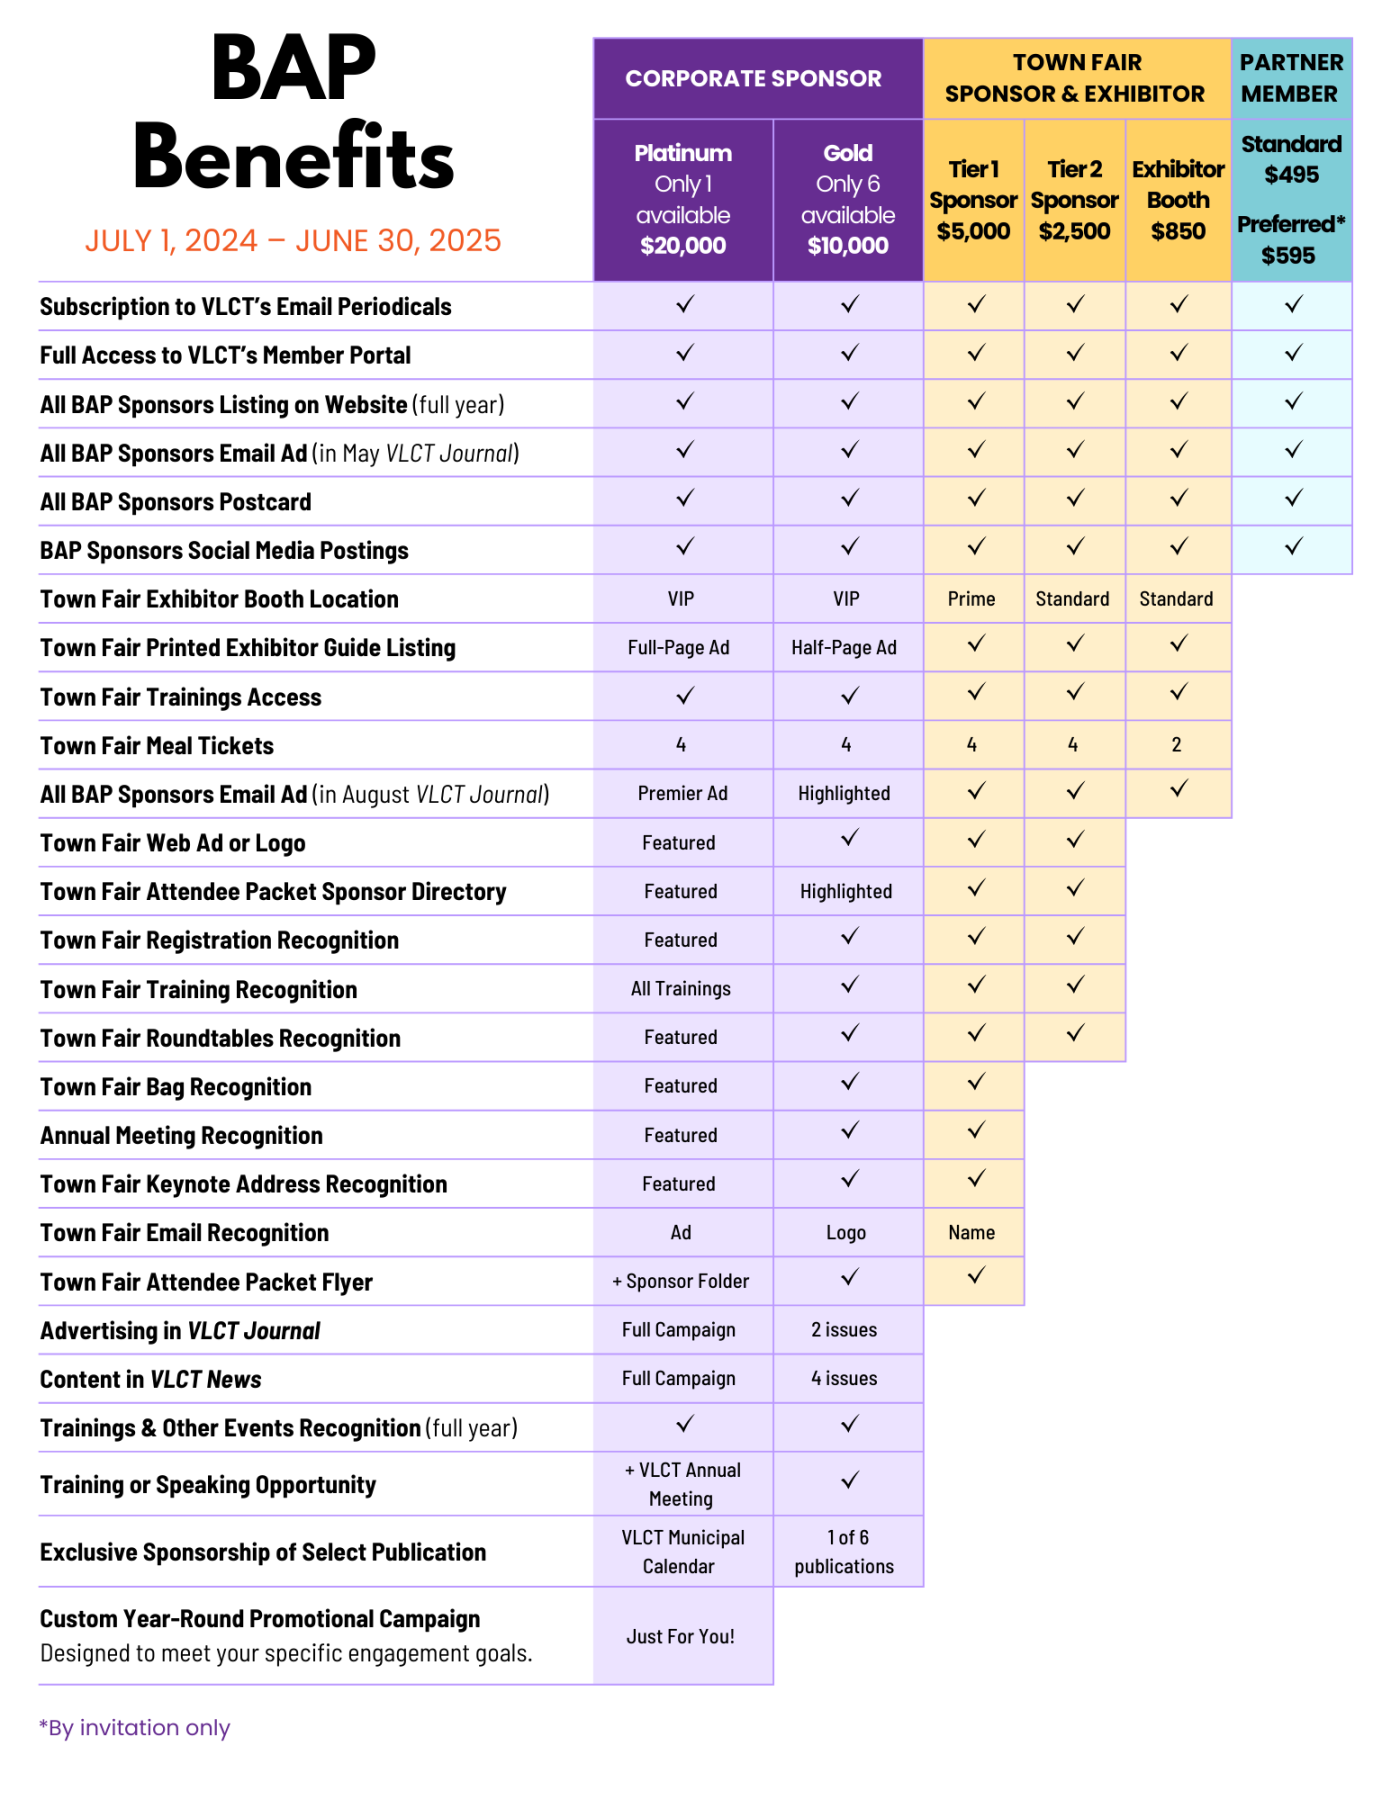 Table listing the various benefits available for the six different BAP plans